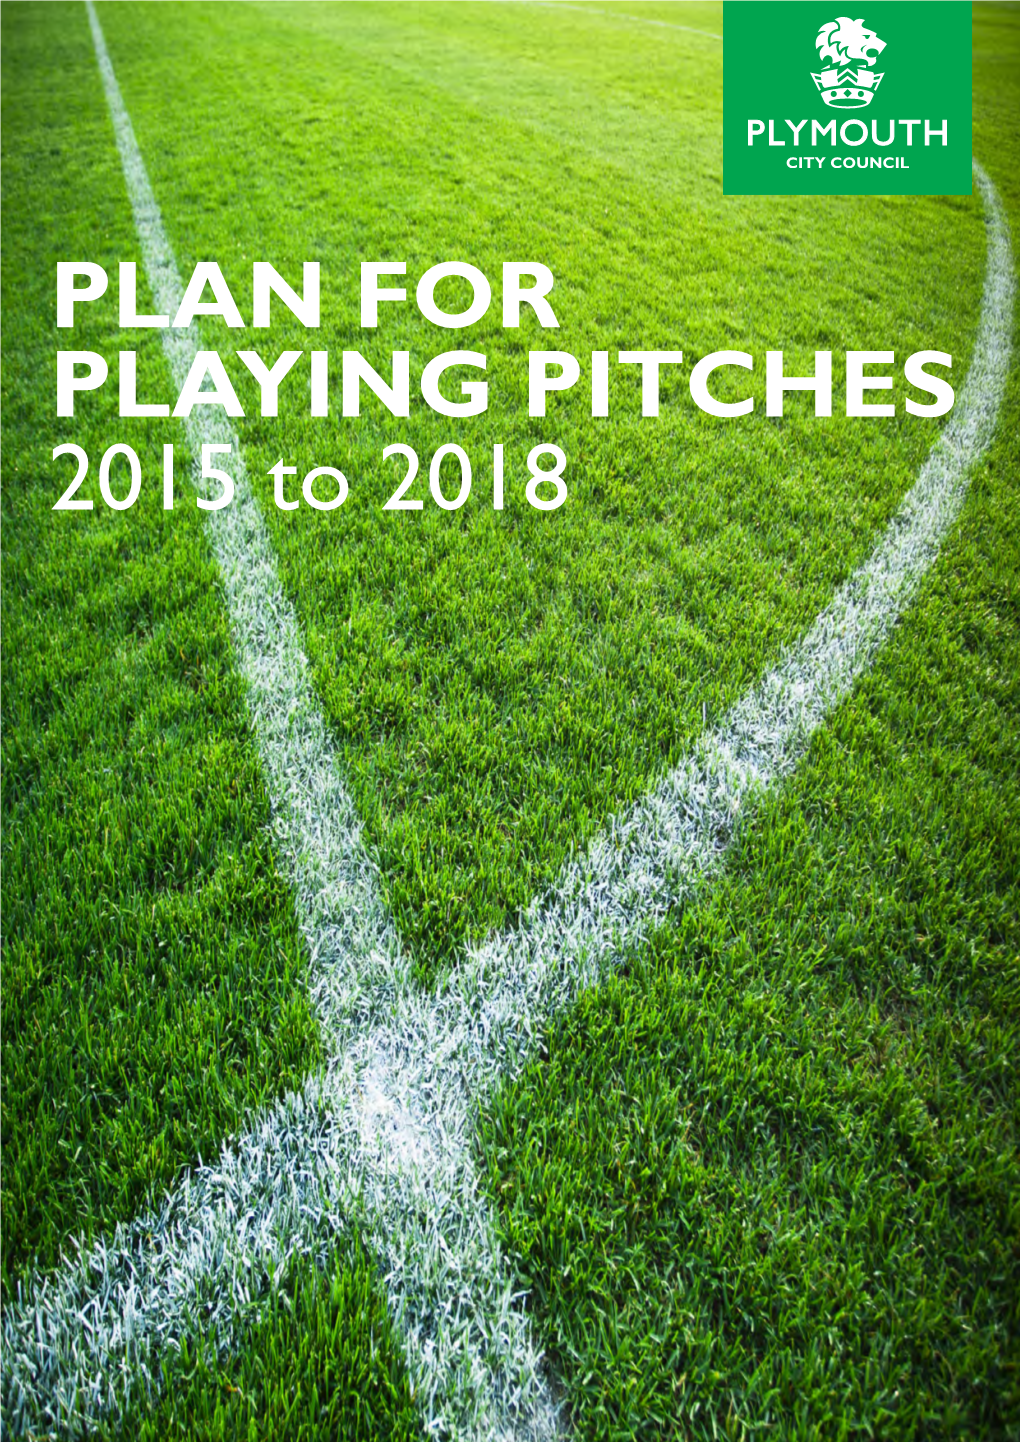 PLAN for PLAYING PITCHES 2015 to 2018